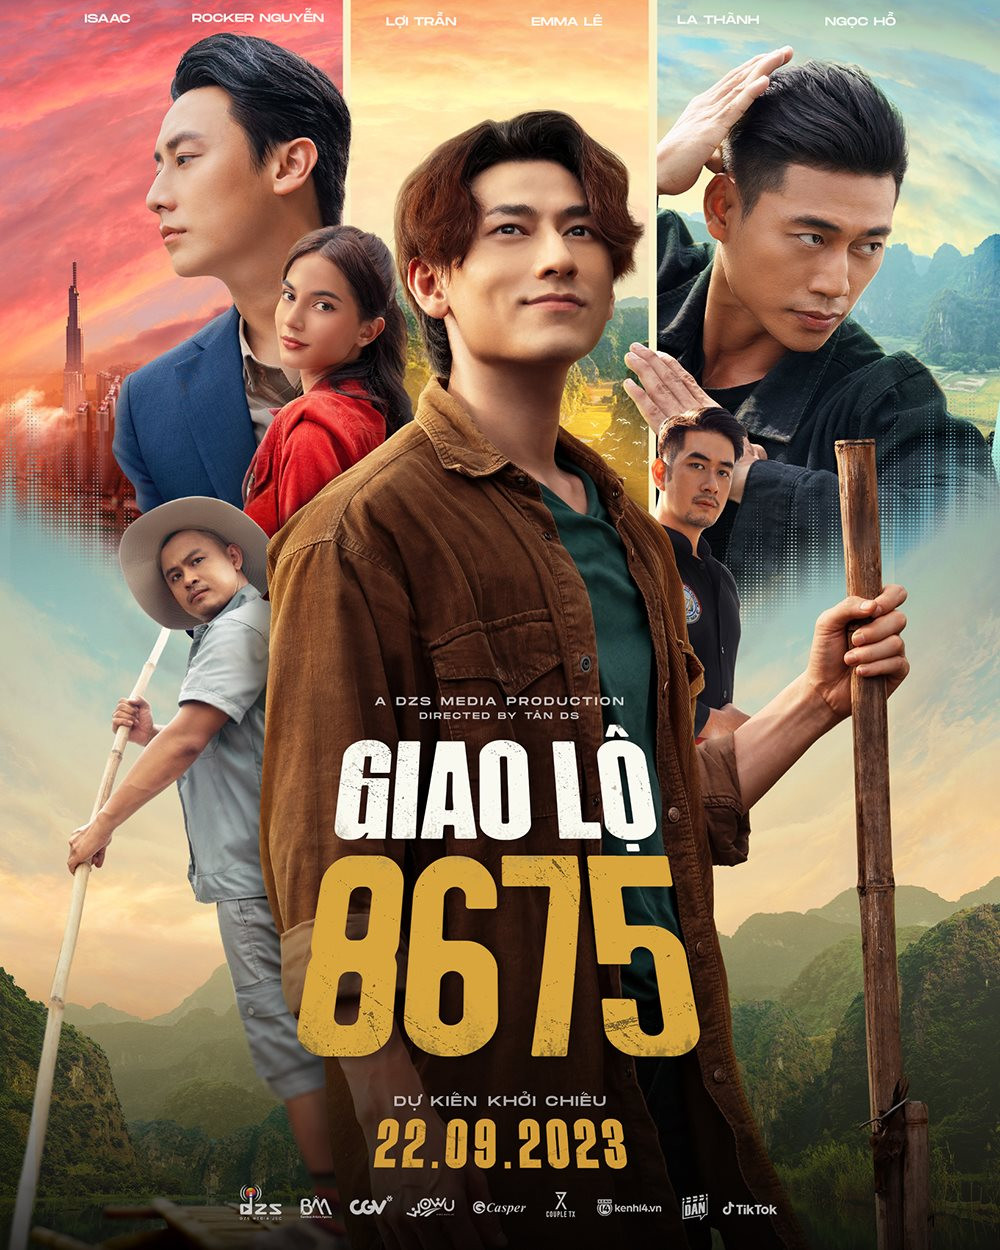 giao-lo-8675-payoff-poster-khoi-chieu-22092023.jpg